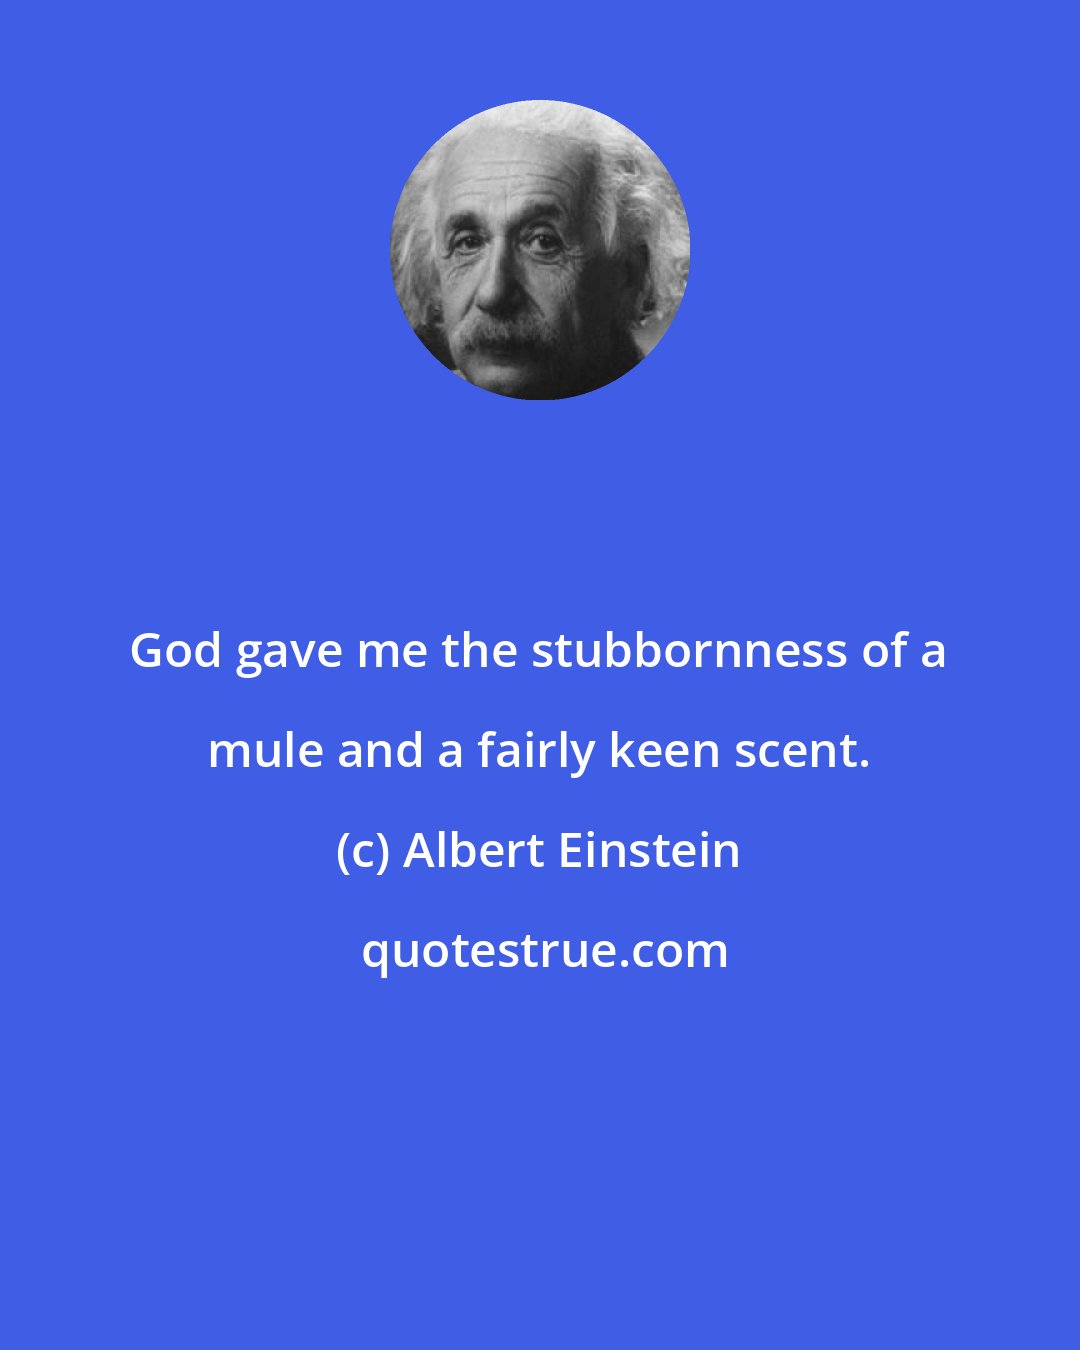 Albert Einstein: God gave me the stubbornness of a mule and a fairly keen scent.